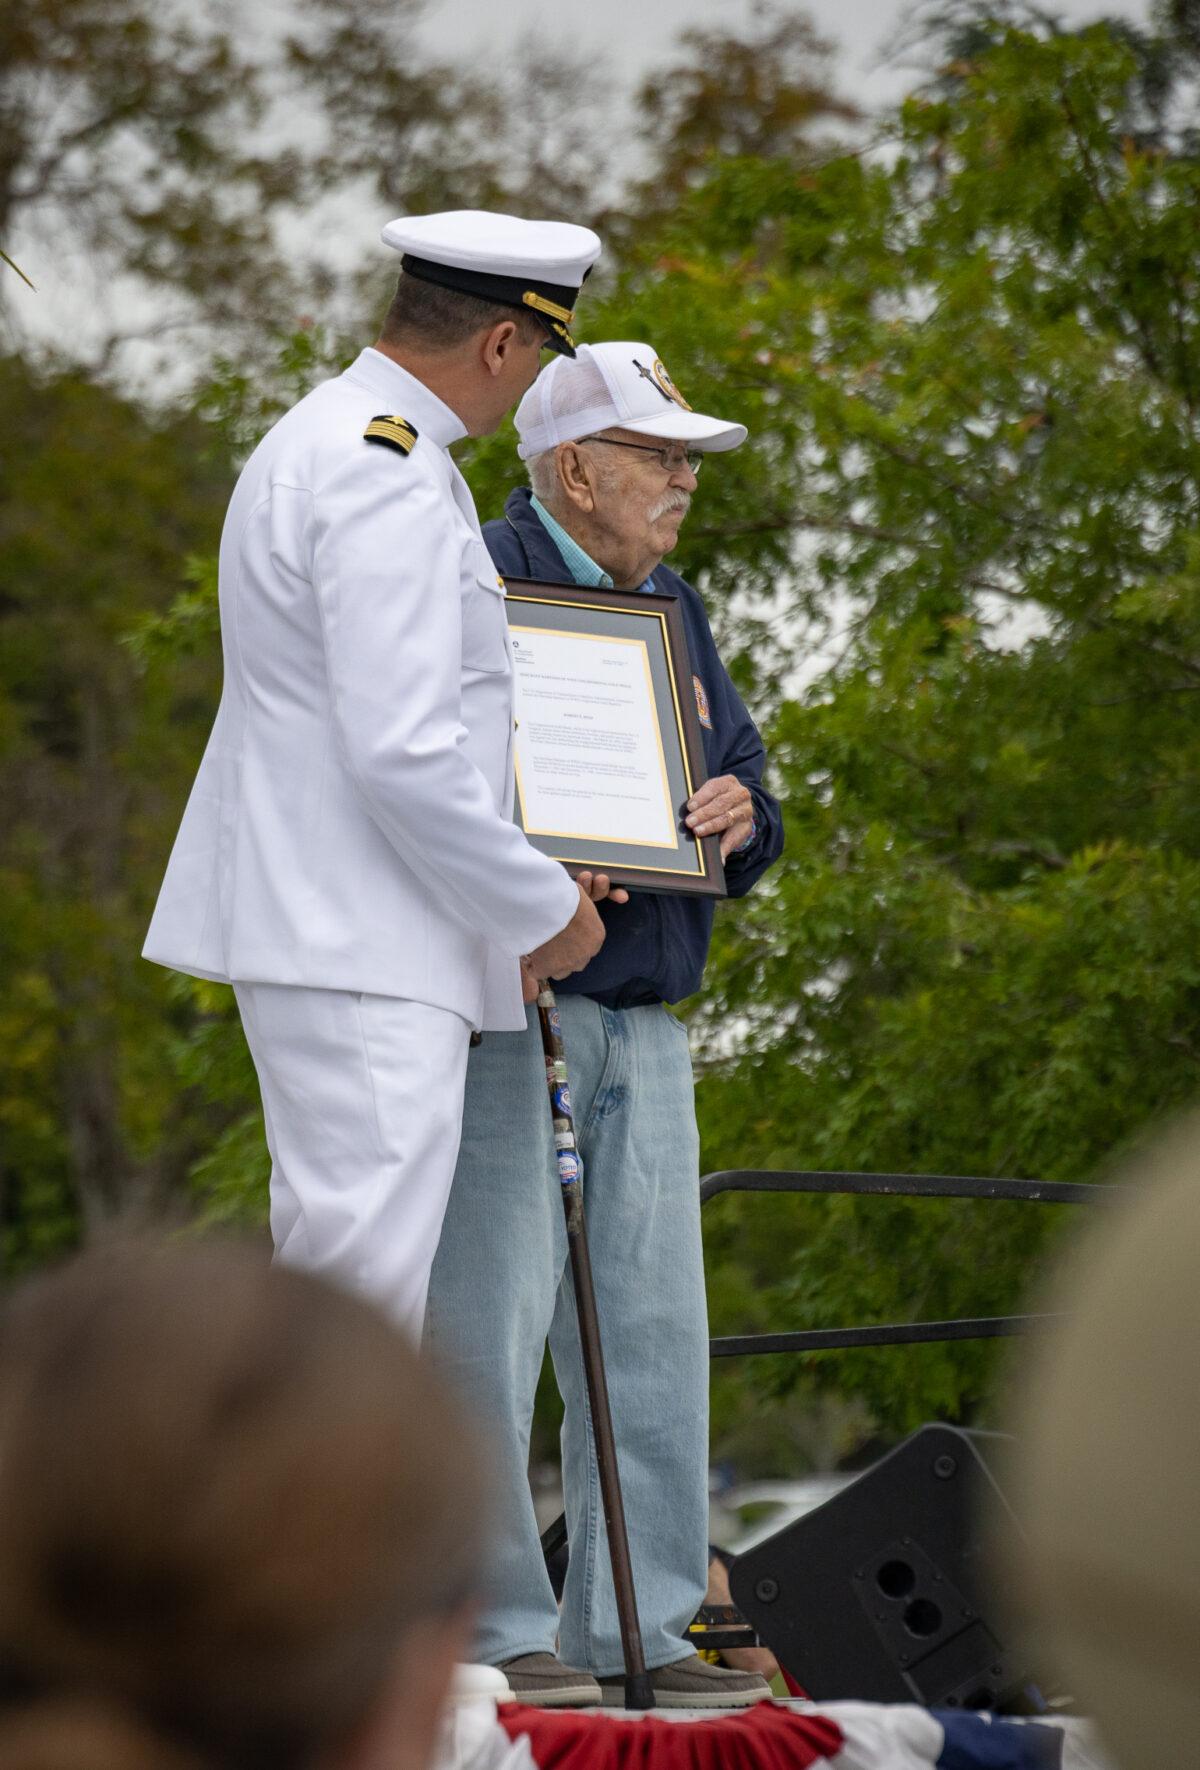 World War II Veteran Robert Reed accepts recognition for his service on stage at Memorial Day celebrations in Fairhaven Memorial Park in Santa Ana, Calif., on May 29, 2023. (John Fredricks/The Epoch Times)